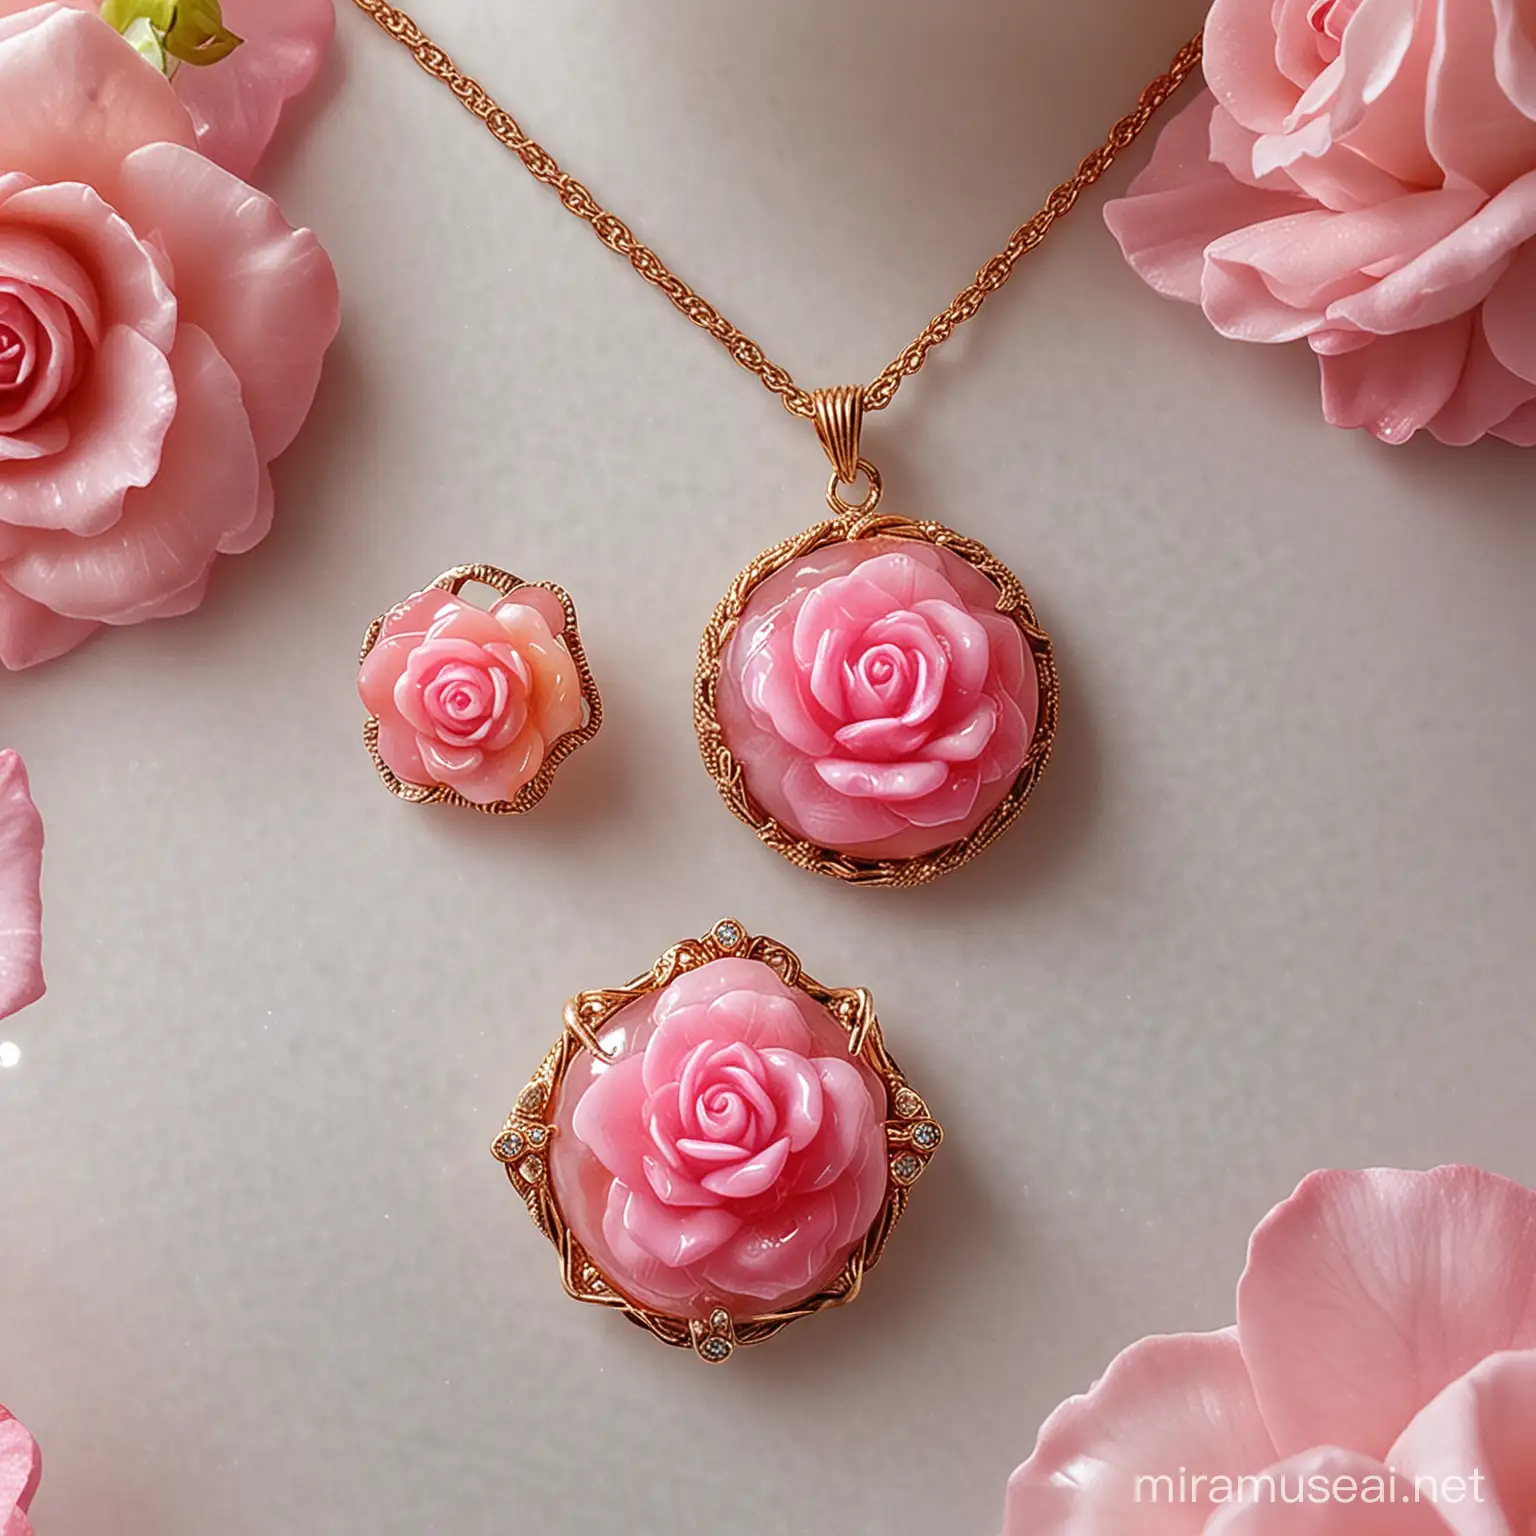 FIRE AGATE Jewelry,  Necklace, Rings and earrings.Razzie dazzie rose The image is a close-up of a pink rose.